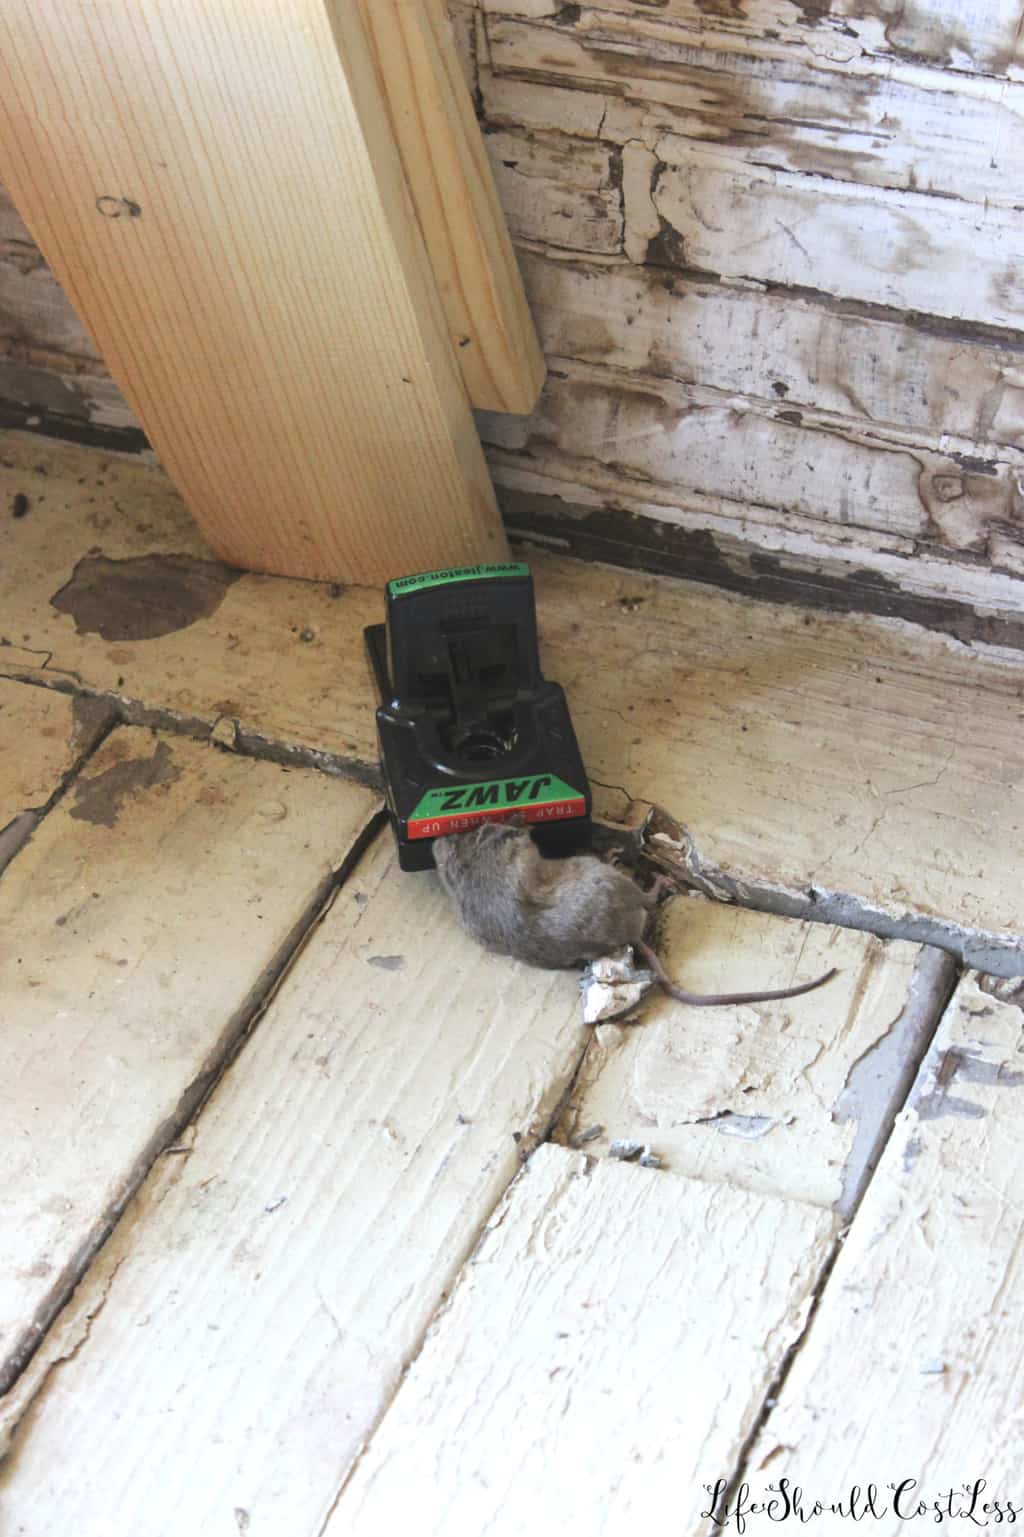 https://lifeshouldcostless.com/wp-content/uploads/2018/09/Mouse-In-Jawz-Mouse-Trap.-Jawz-Mouse-Trap-Product-Review.-lifeshouldcostless.com_.jpg